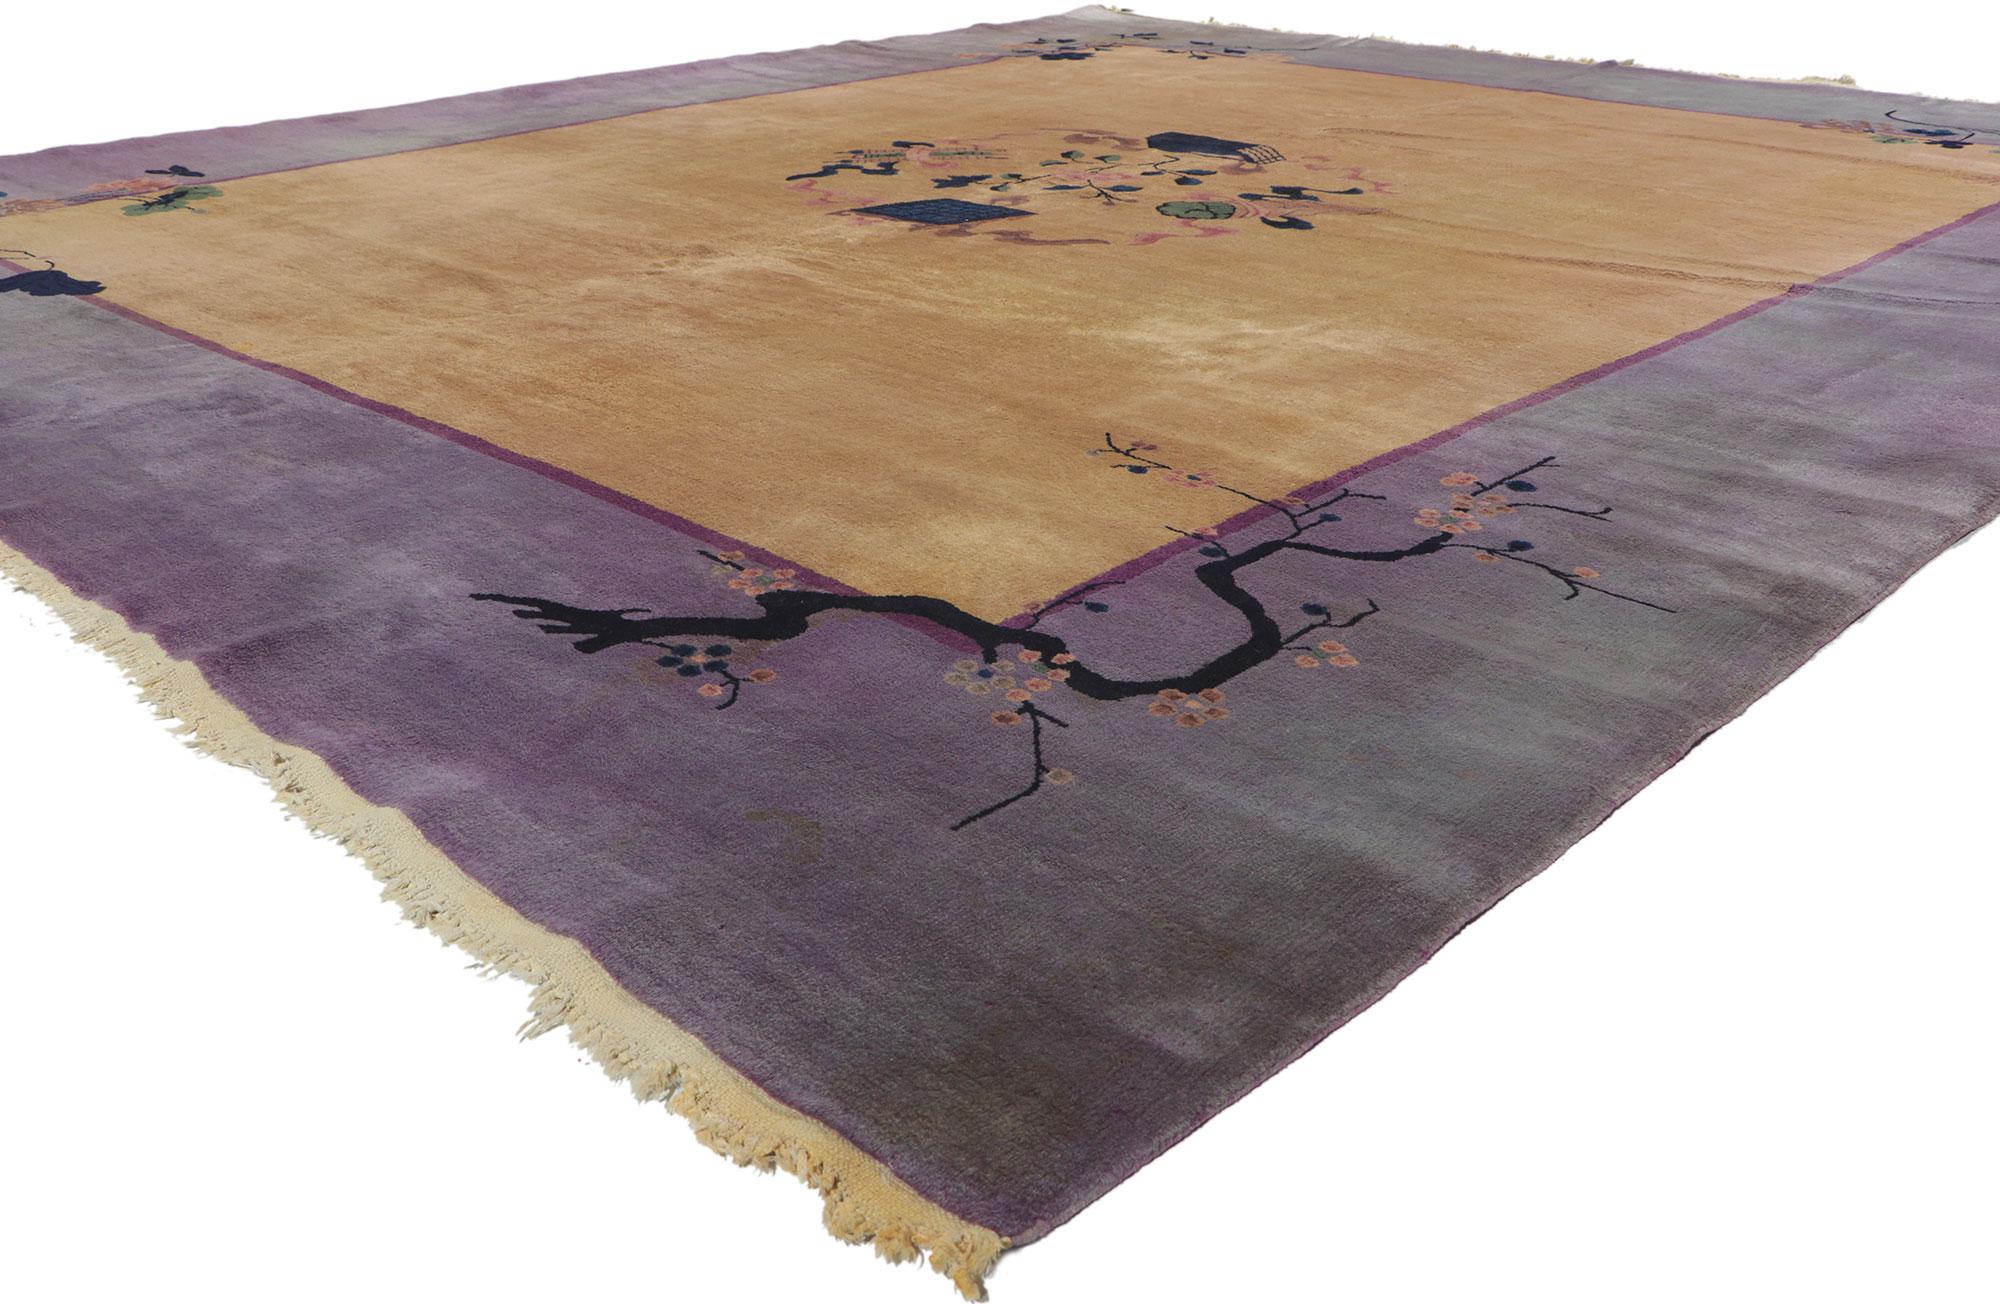 78185 Antique Chinese Art Deco Rug, 10'02 x 11'07. This hand-knotted wool antique Chinese pictorial rug features a colorblock field design. With its cold, arid climate ideal for raising sheep, Baotou, a city in the Inner Mongolia region of China,